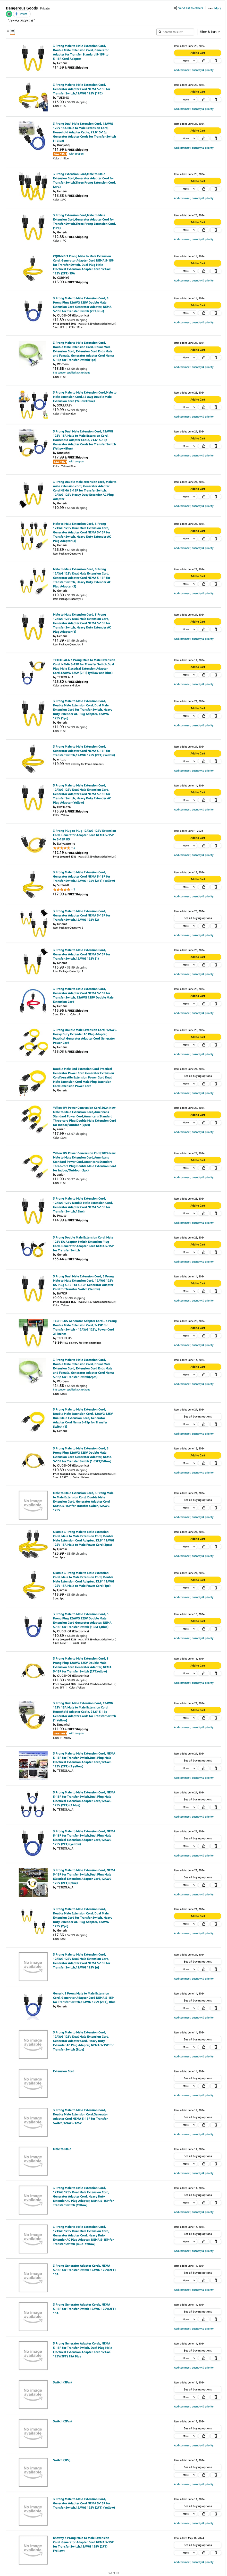 screenshot of amazon shopping list full of suicide cords, 37 available for purchase.